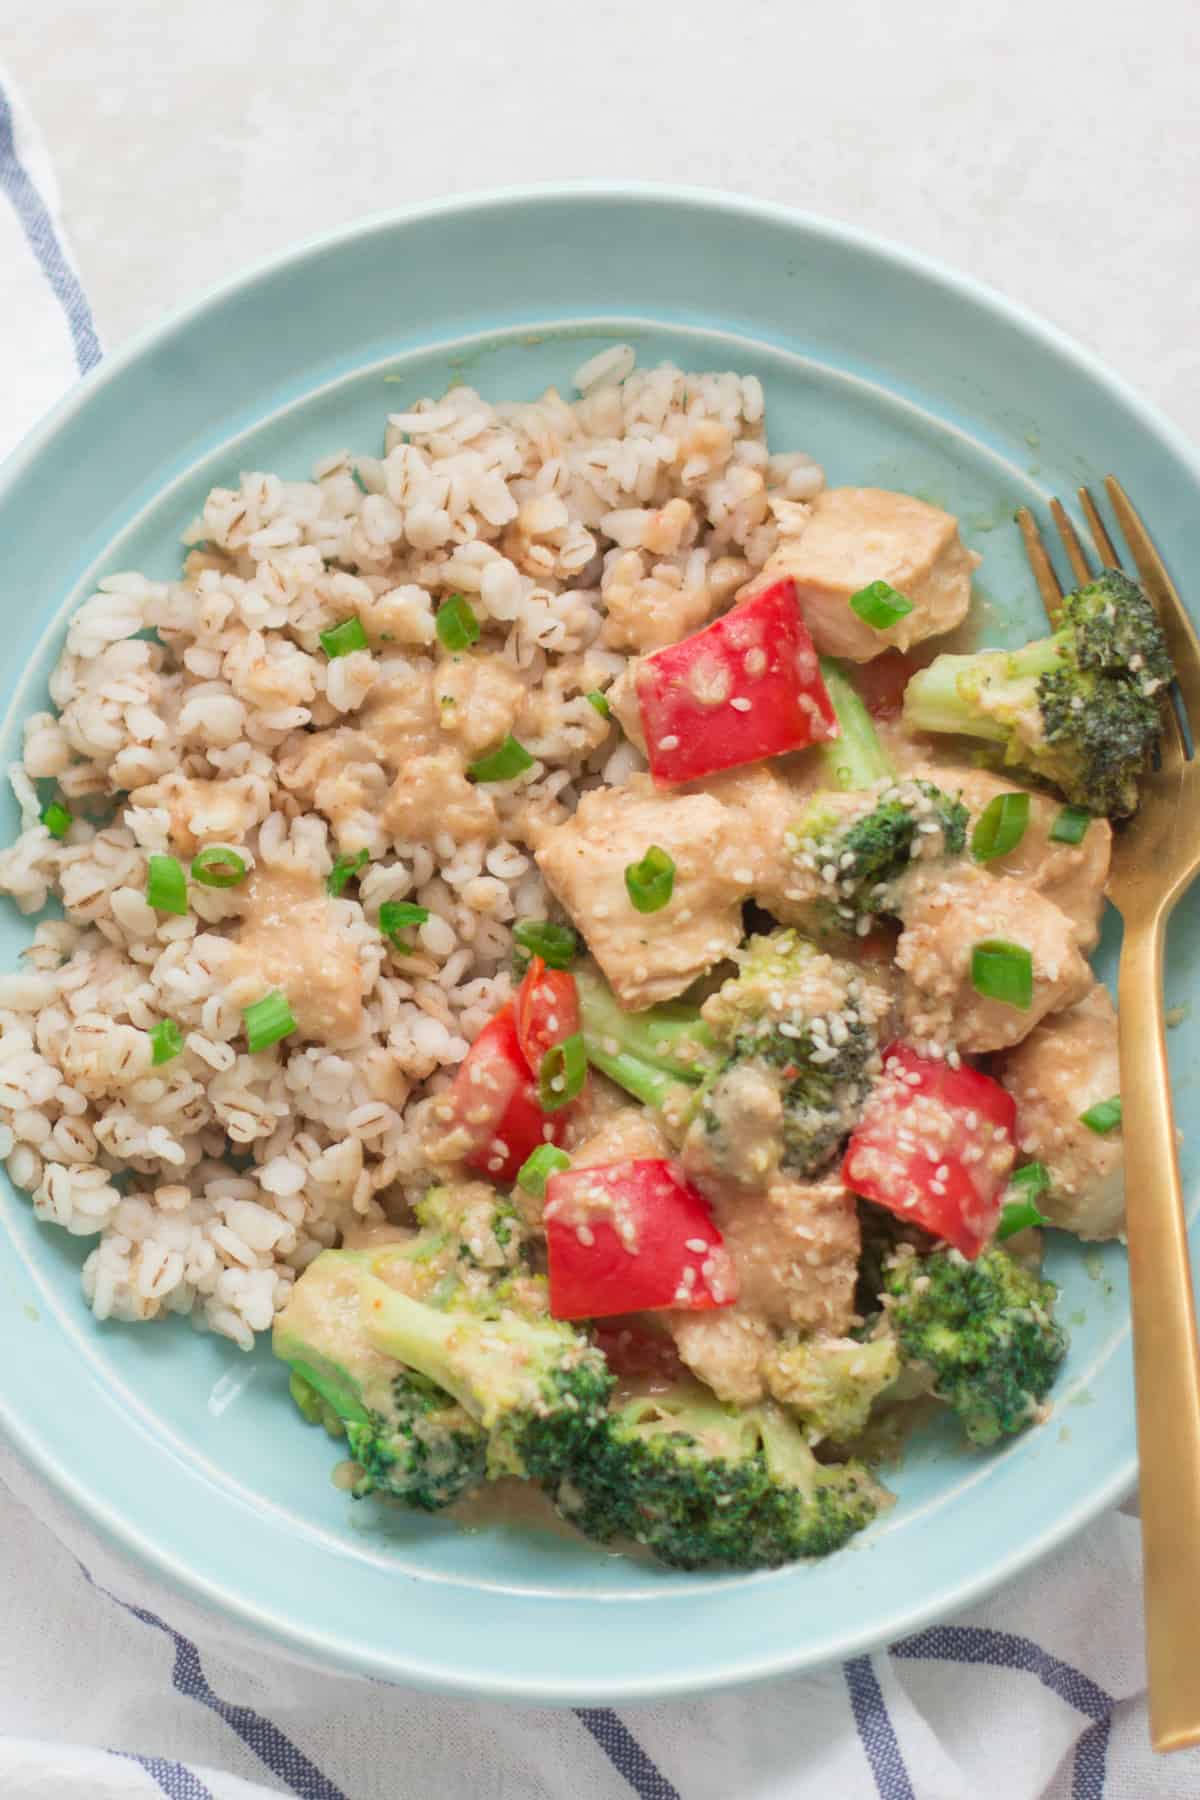 peanut chicken and broccoli served with barley on a blue plate with a a fork